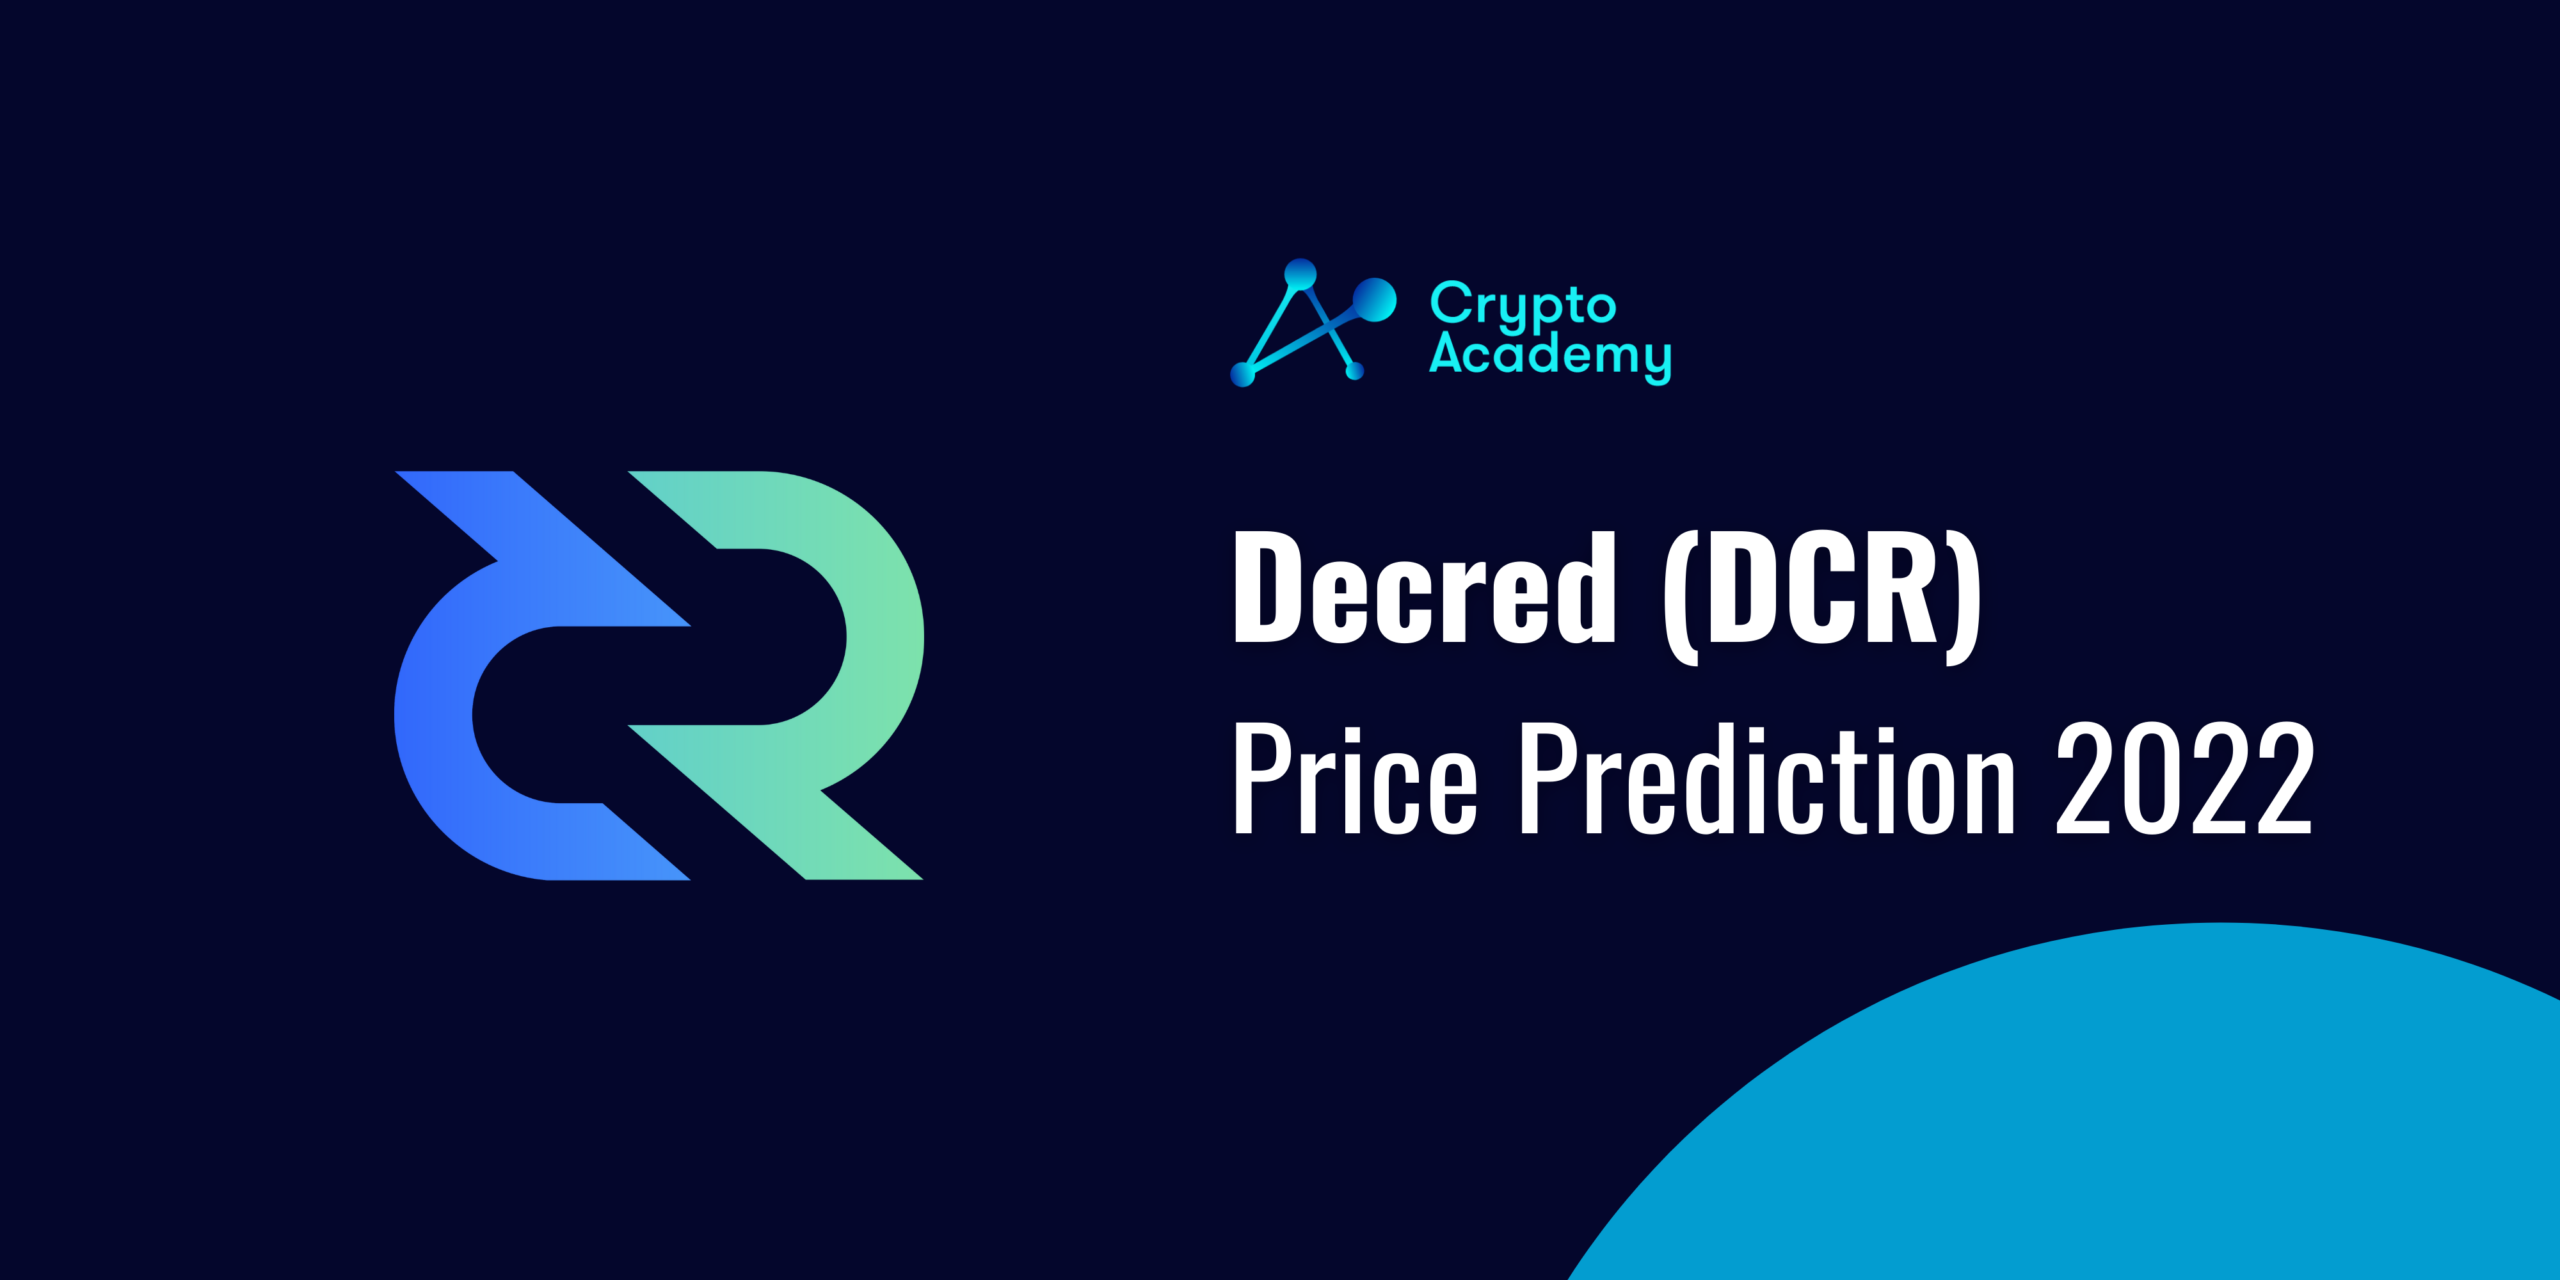 Decred Price Prediction 2022 and Beyond – Can DCR Ever Reach $1,000